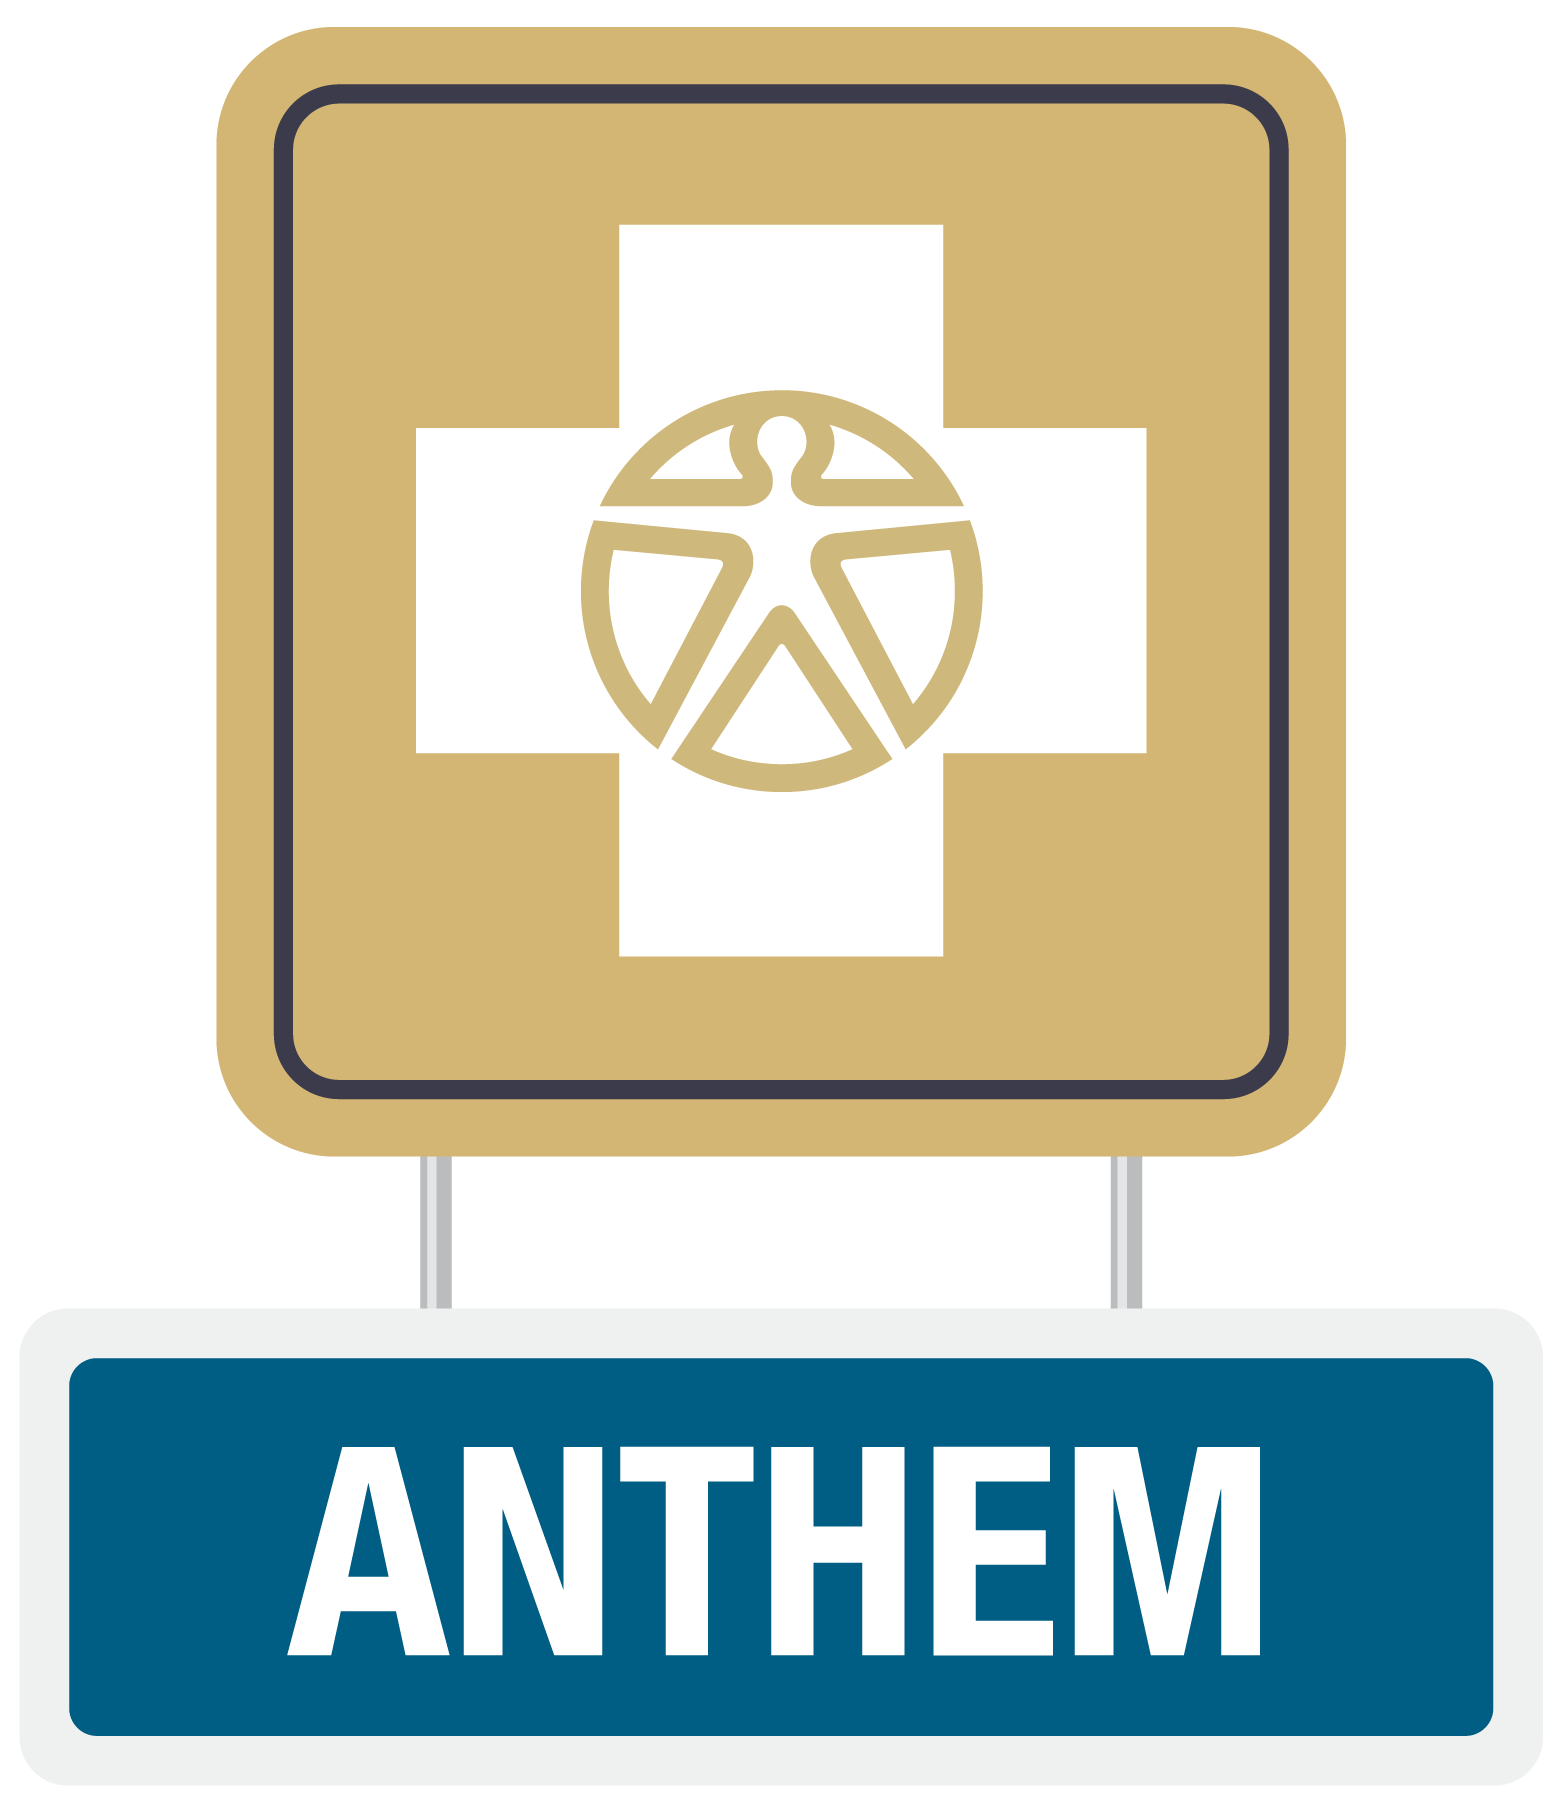 Anthem fair page - click to access